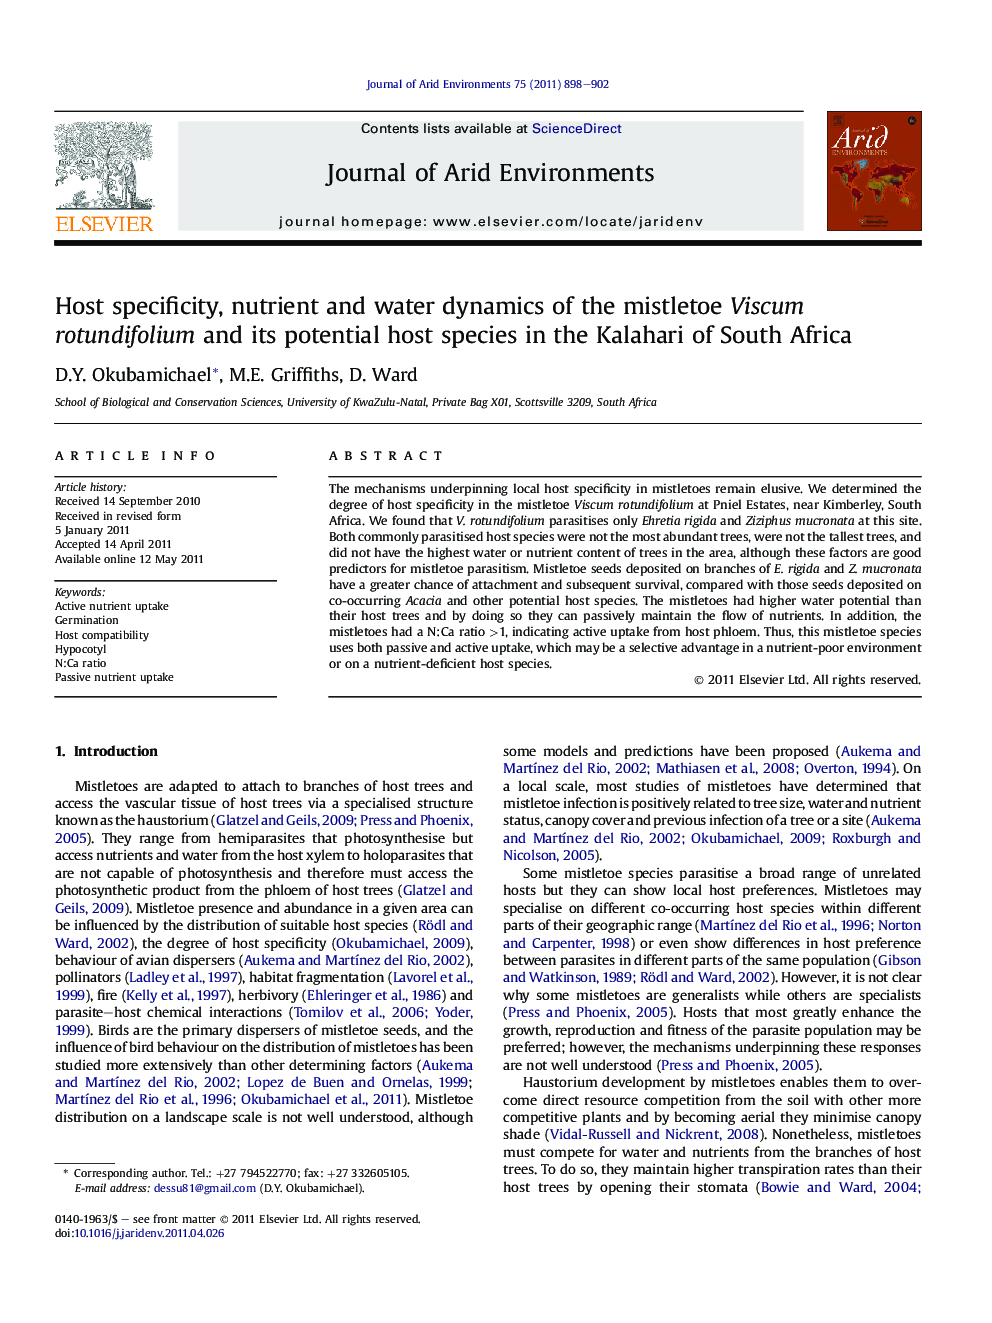 Host specificity, nutrient and water dynamics of the mistletoe Viscum rotundifolium and its potential host species in the Kalahari of South Africa